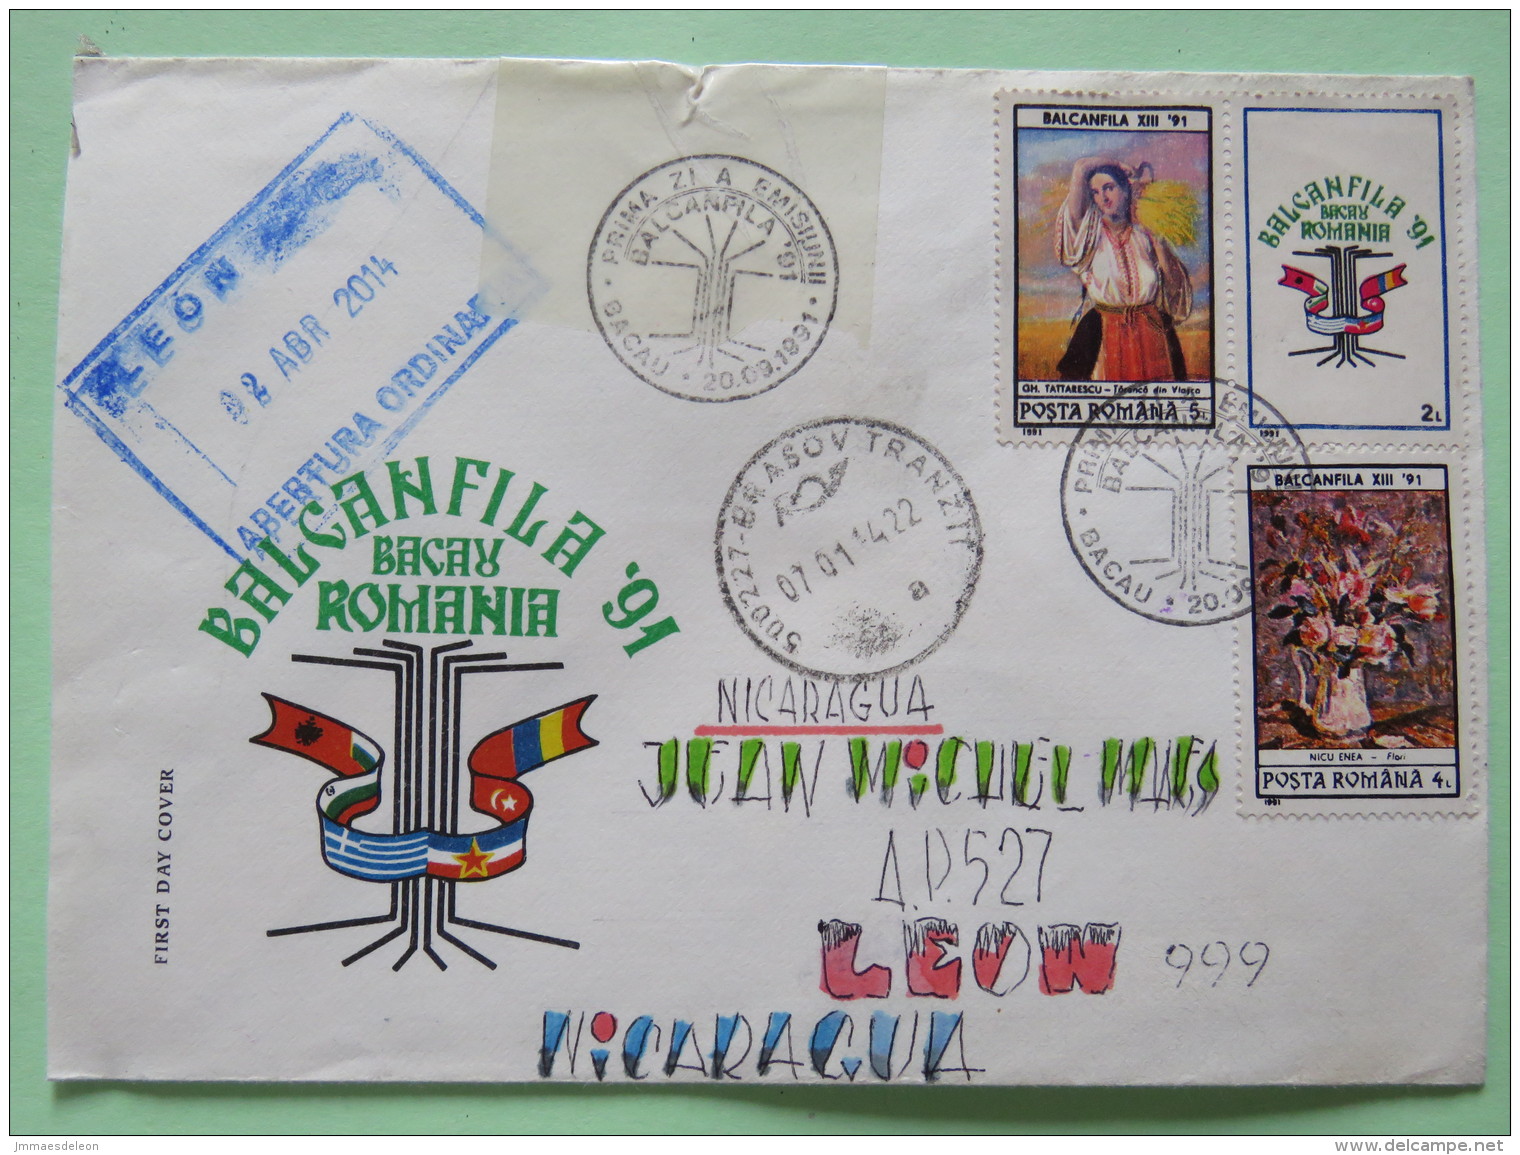 Romania 2014 FDC Cover Bacau (1991) Brasov To Nicaragua - BALCANFILA 91 + Label - Plant Flower On Back - Lettres & Documents